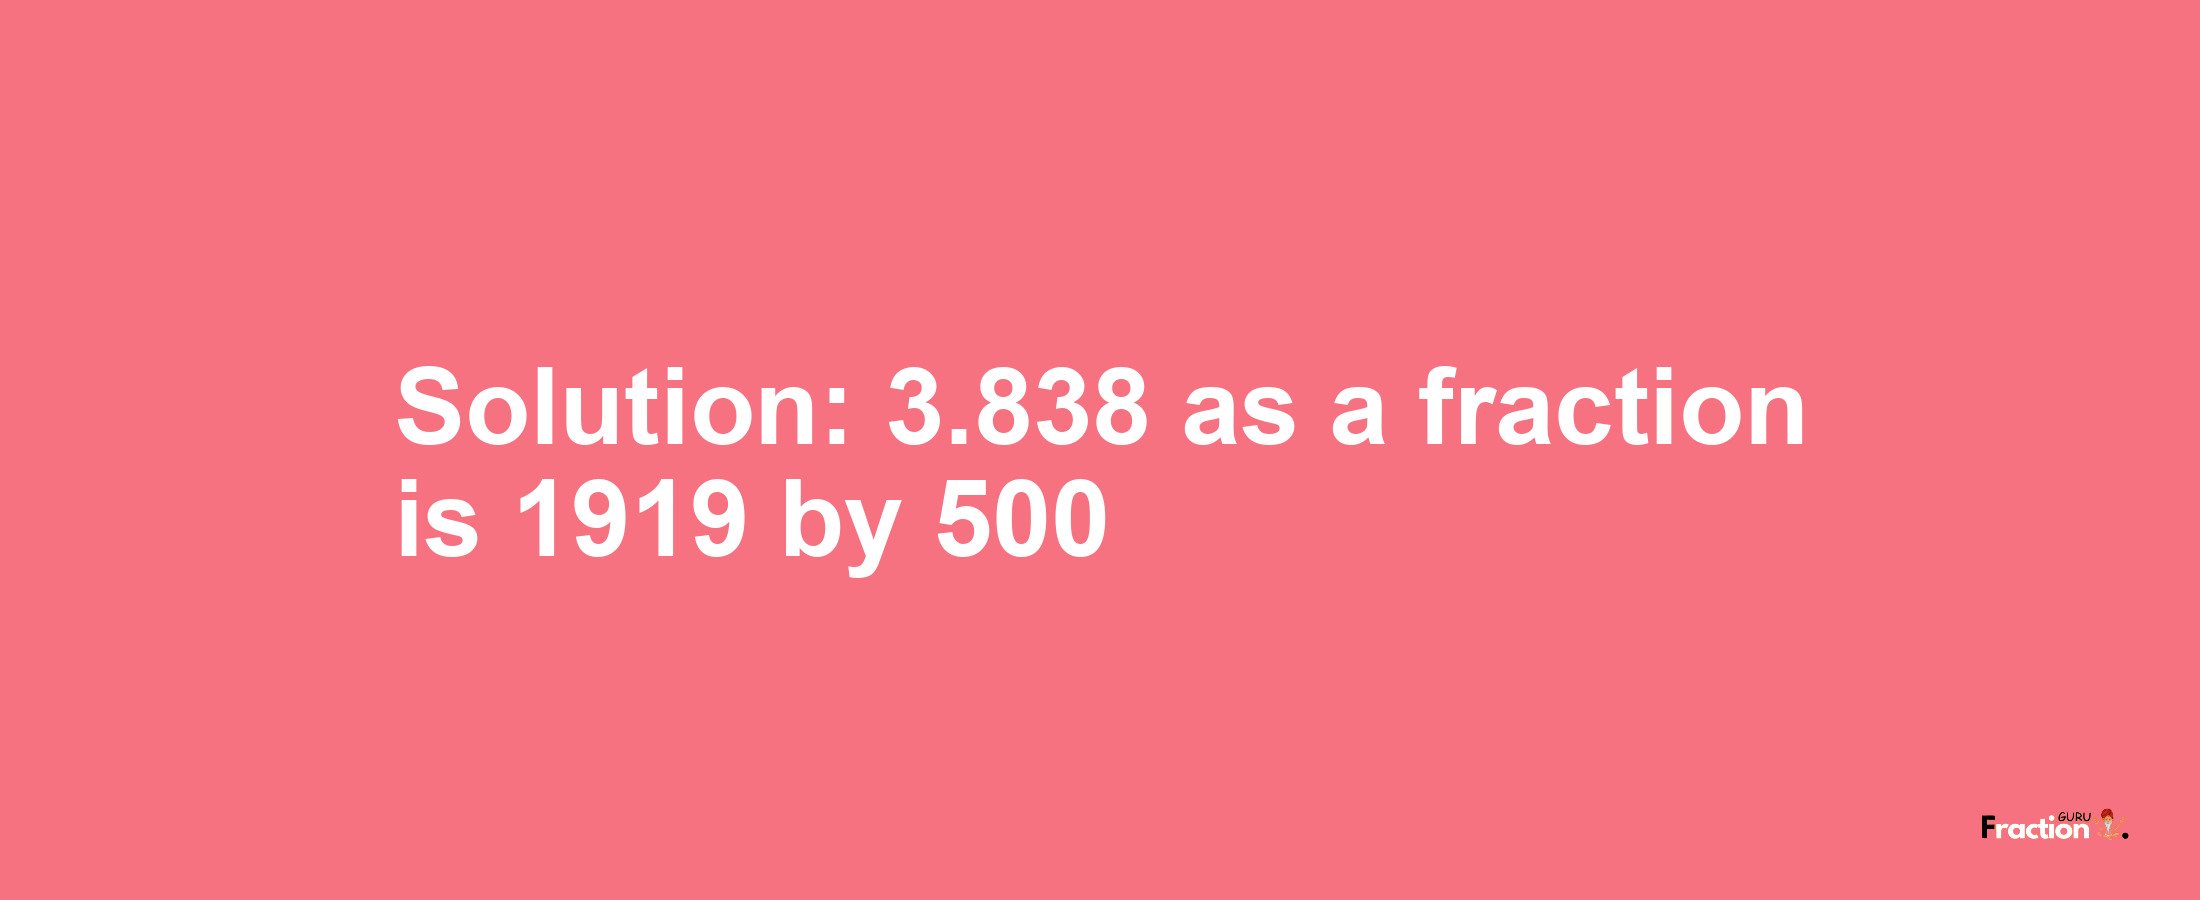 Solution:3.838 as a fraction is 1919/500